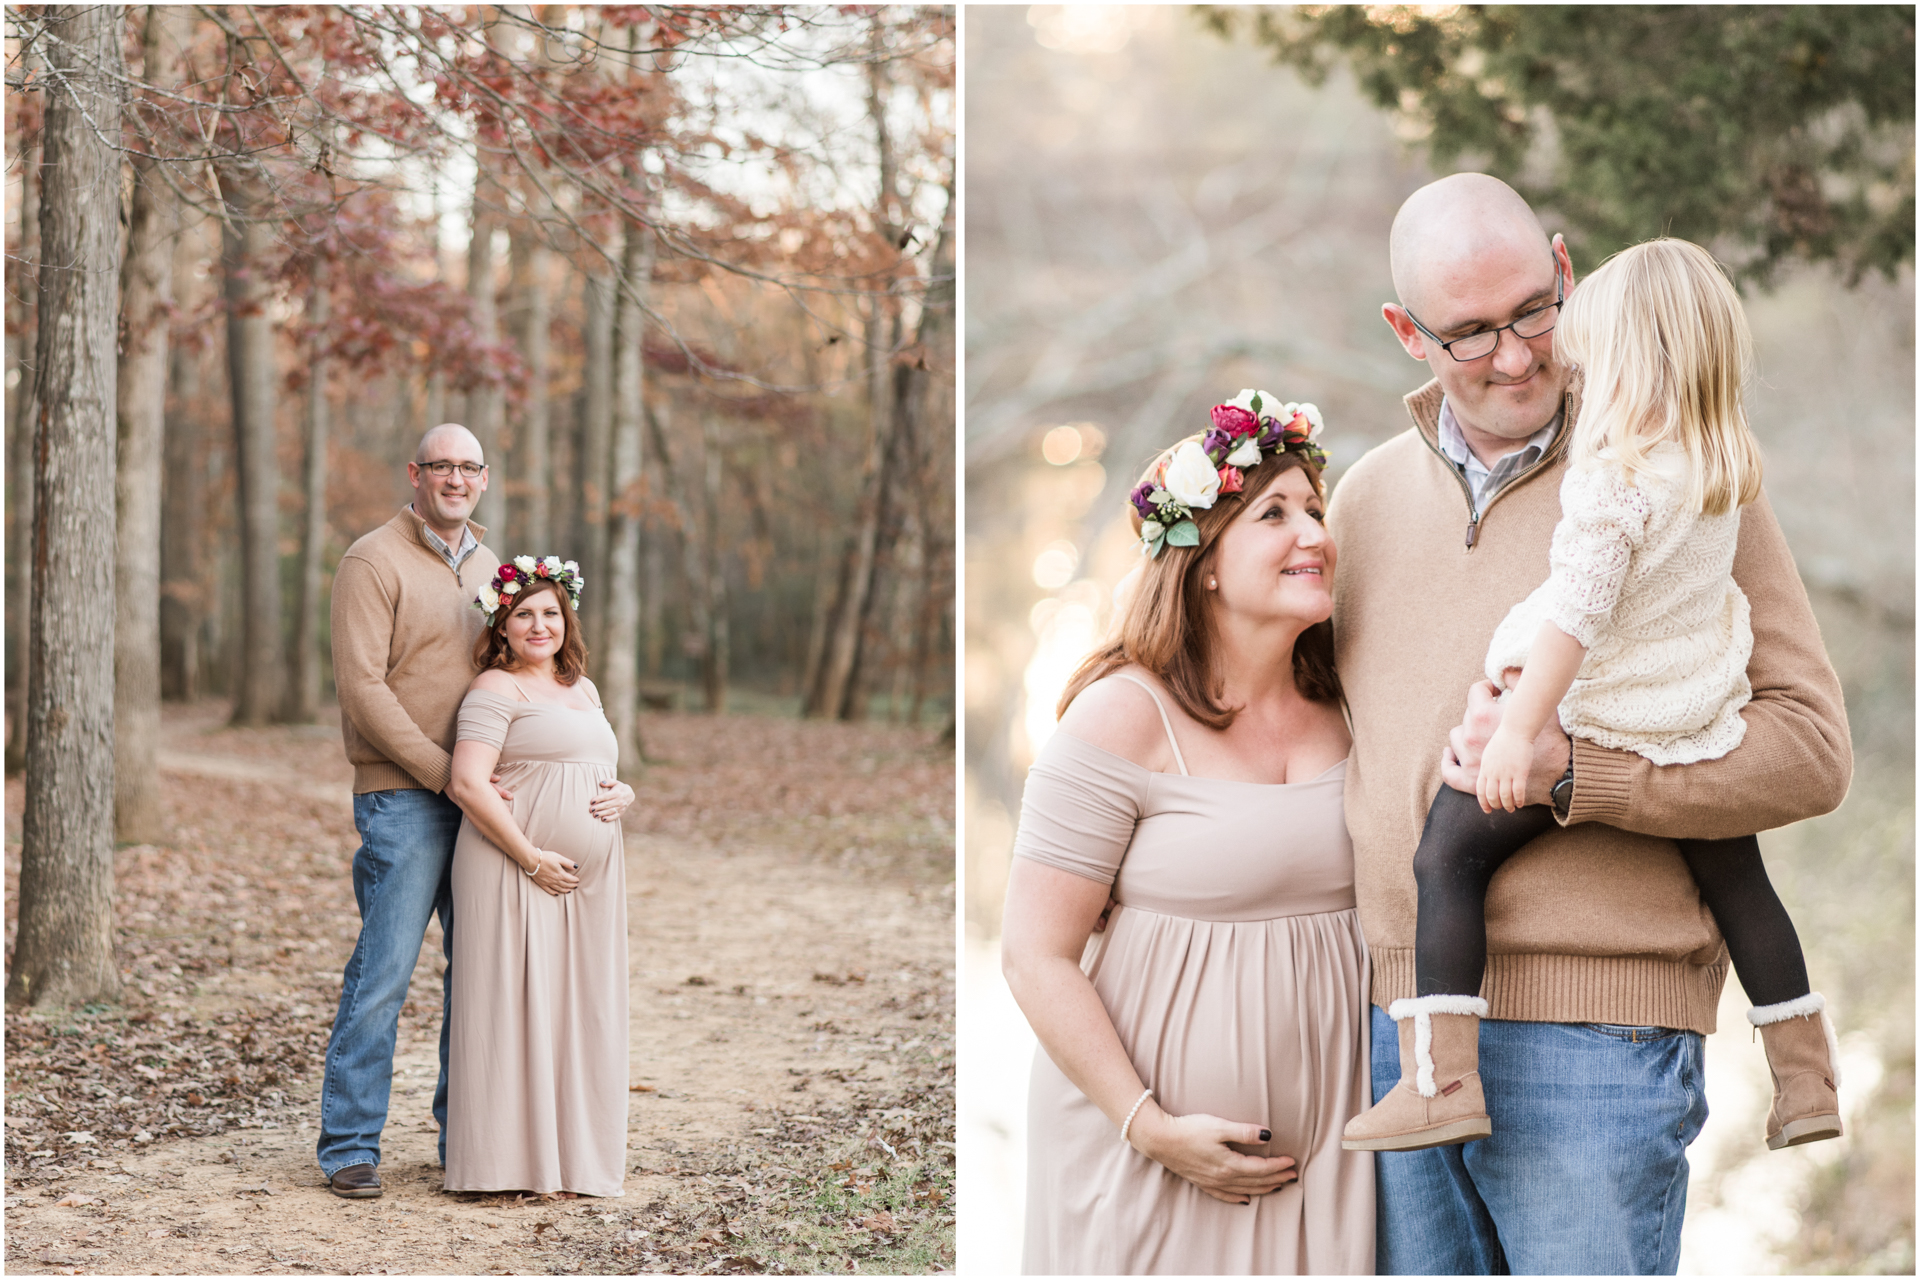 Hays Nature Preserve - Huntsville Family Photography - Glowing Momma with flower crown